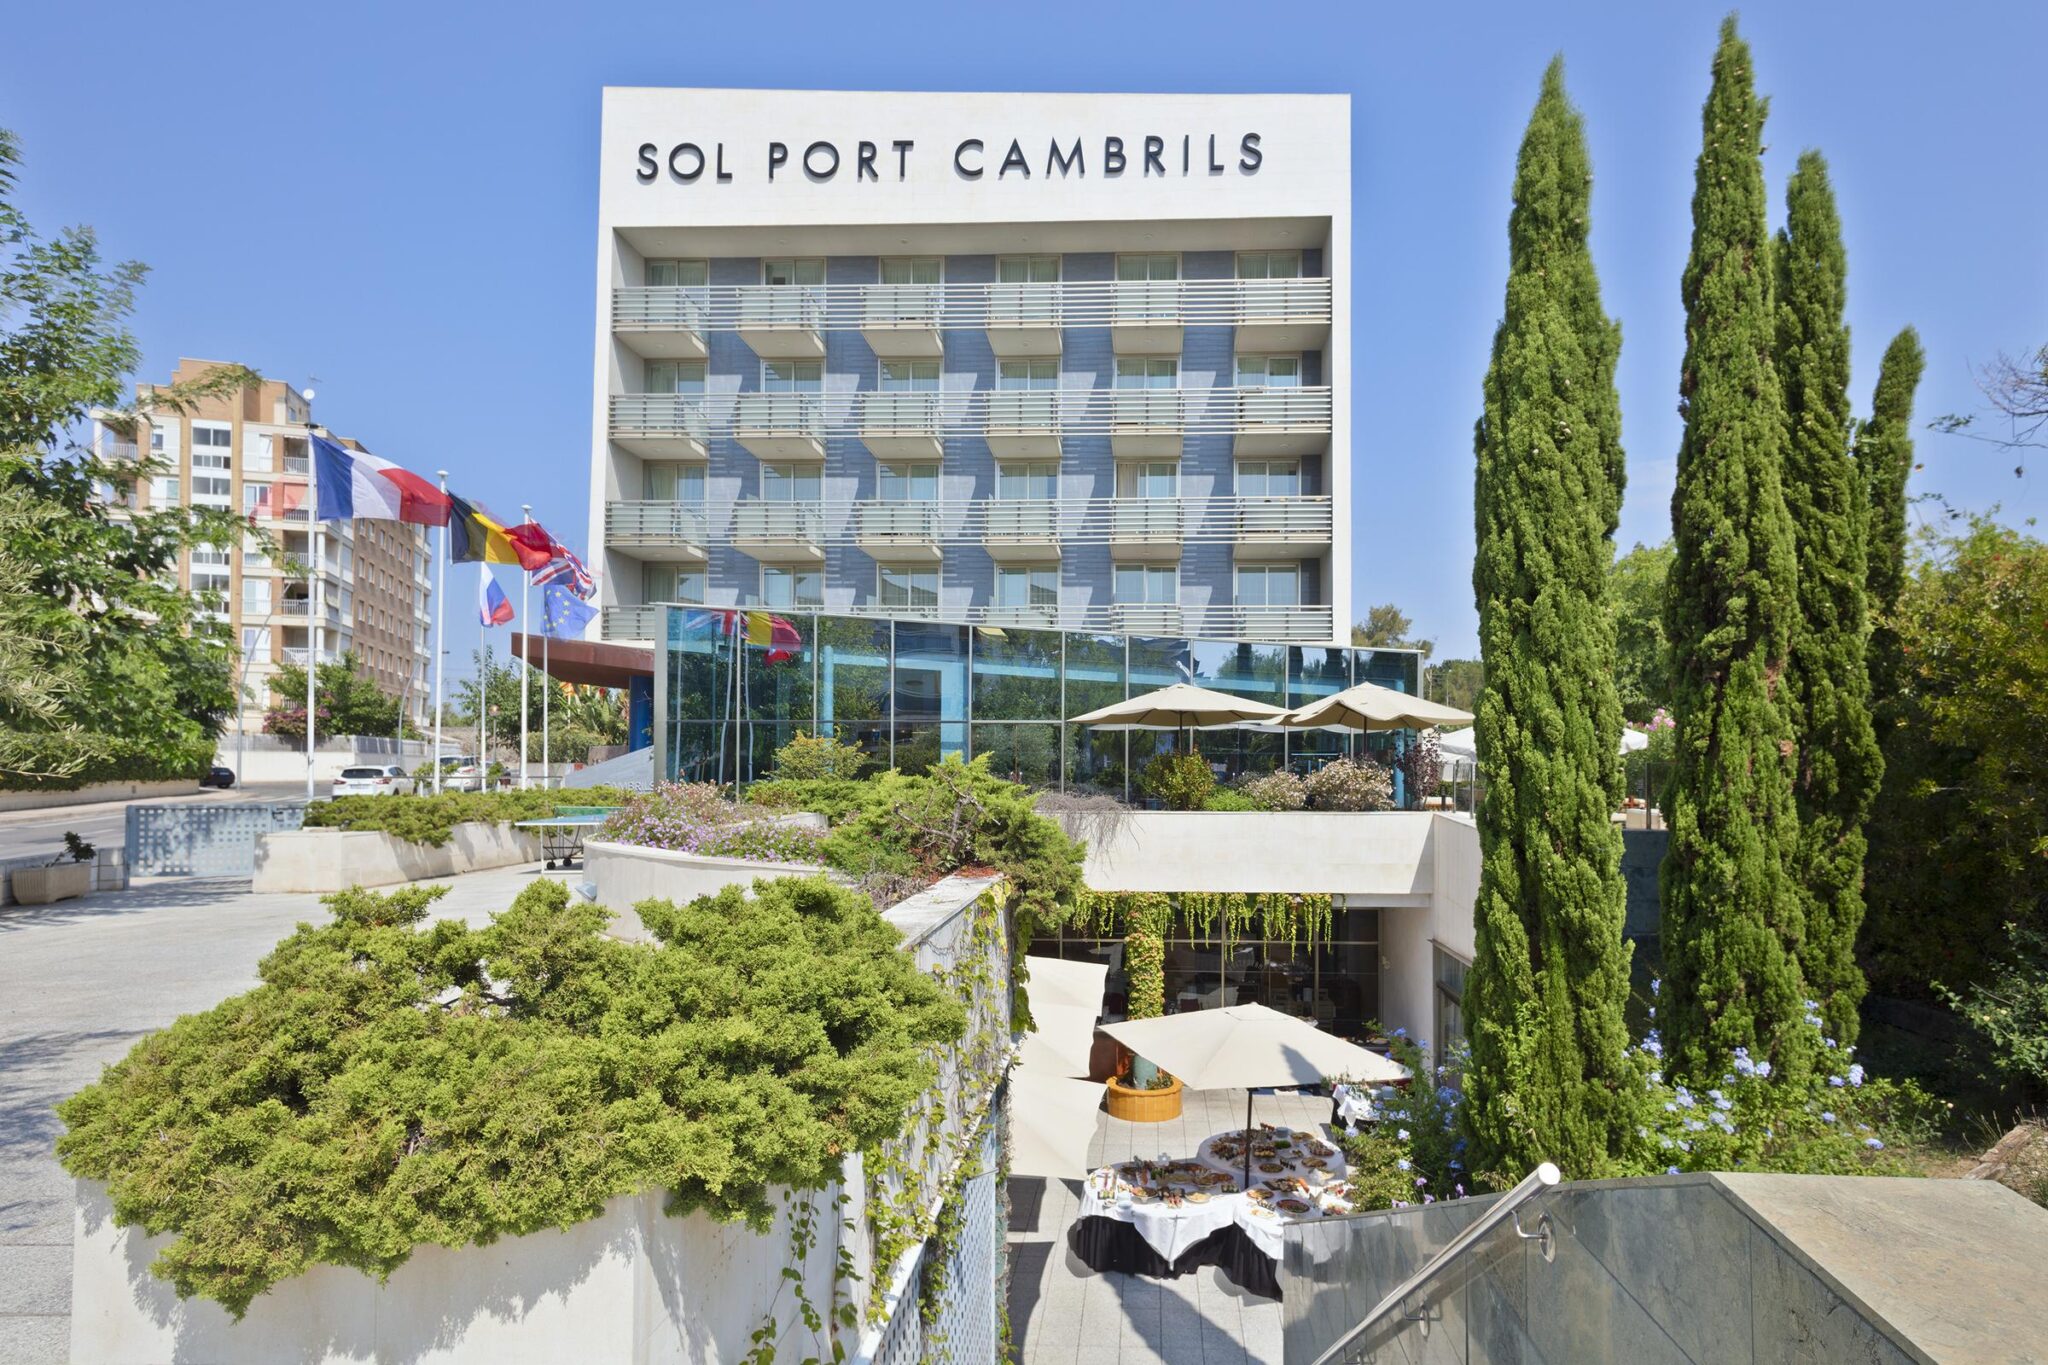 Enjoy your golf break to Sol Port Cambrils. Picture yourself settling into you stay with this stunning and modern 4 star hotel.